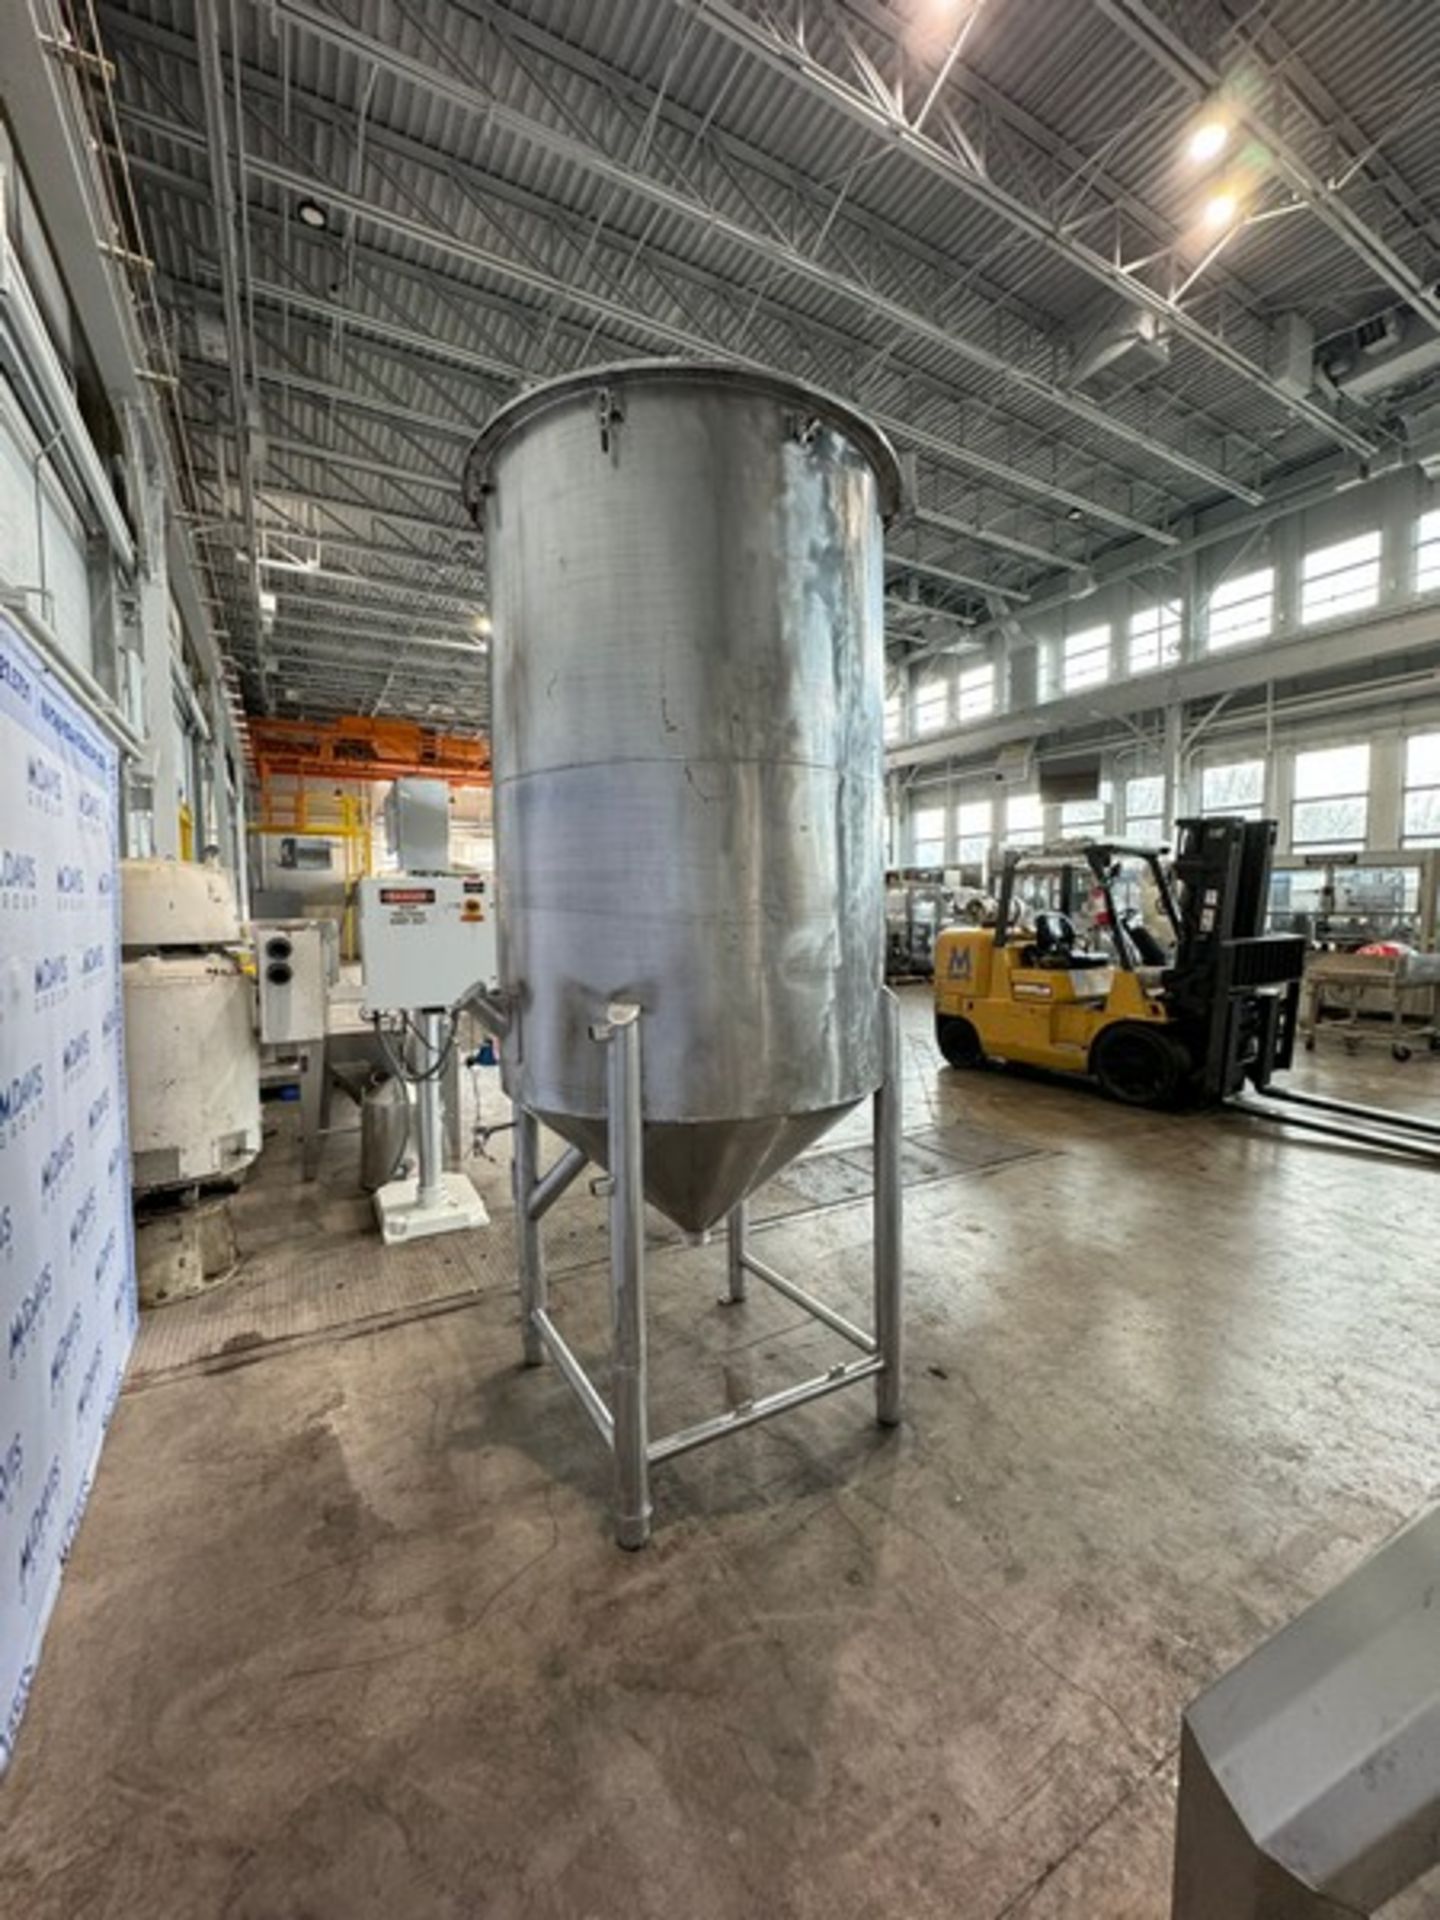 Aprox. 500 Gal. S/S Single Wall Tank, Vessel Dims.: Aprox. 70" Tall x 48" Dia., with Cone Bottom, - Image 4 of 8